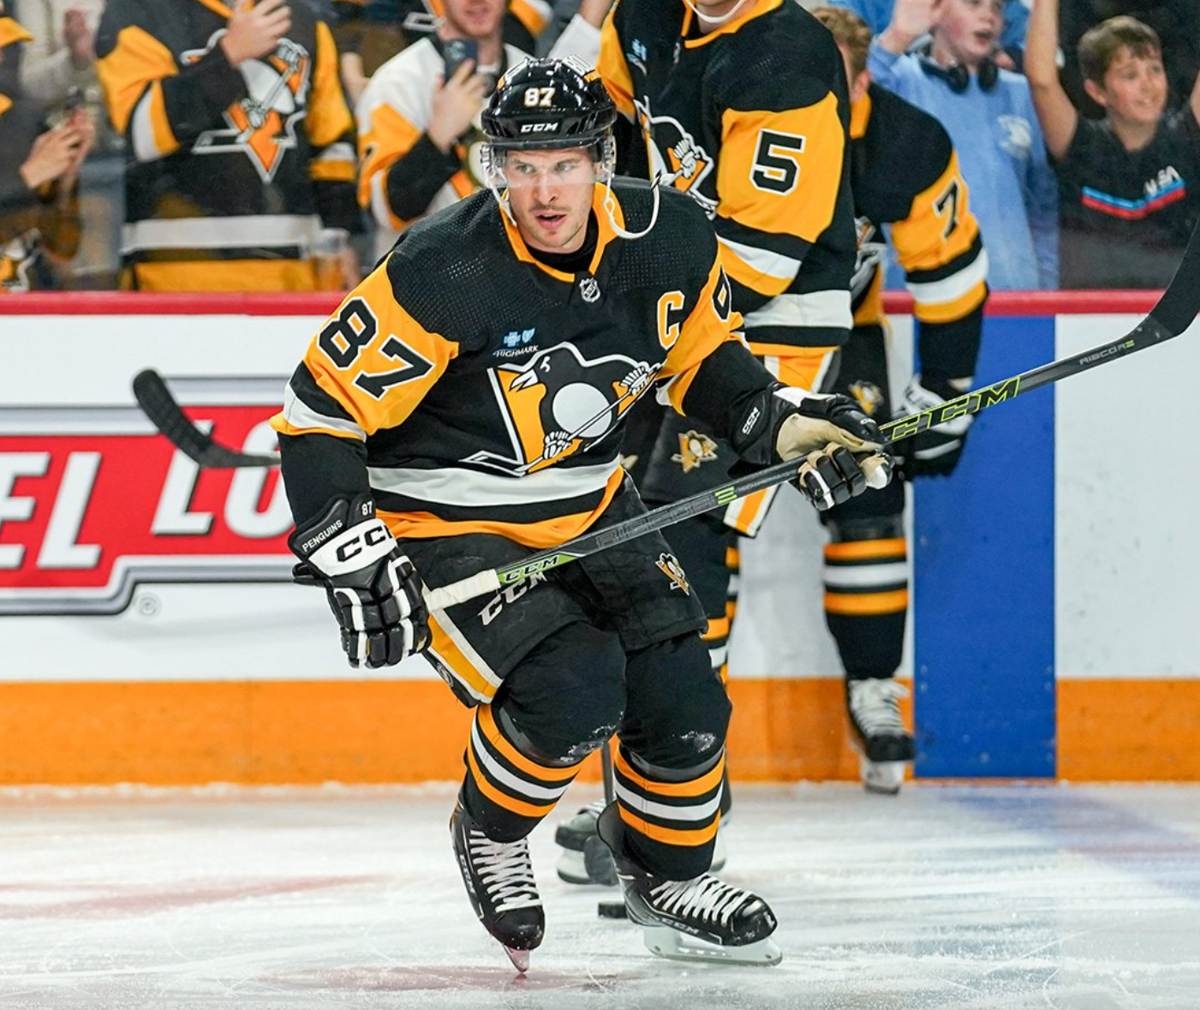 Bryan Rust 'week to week,' Sidney Crosby will not play Tuesday for Penguins